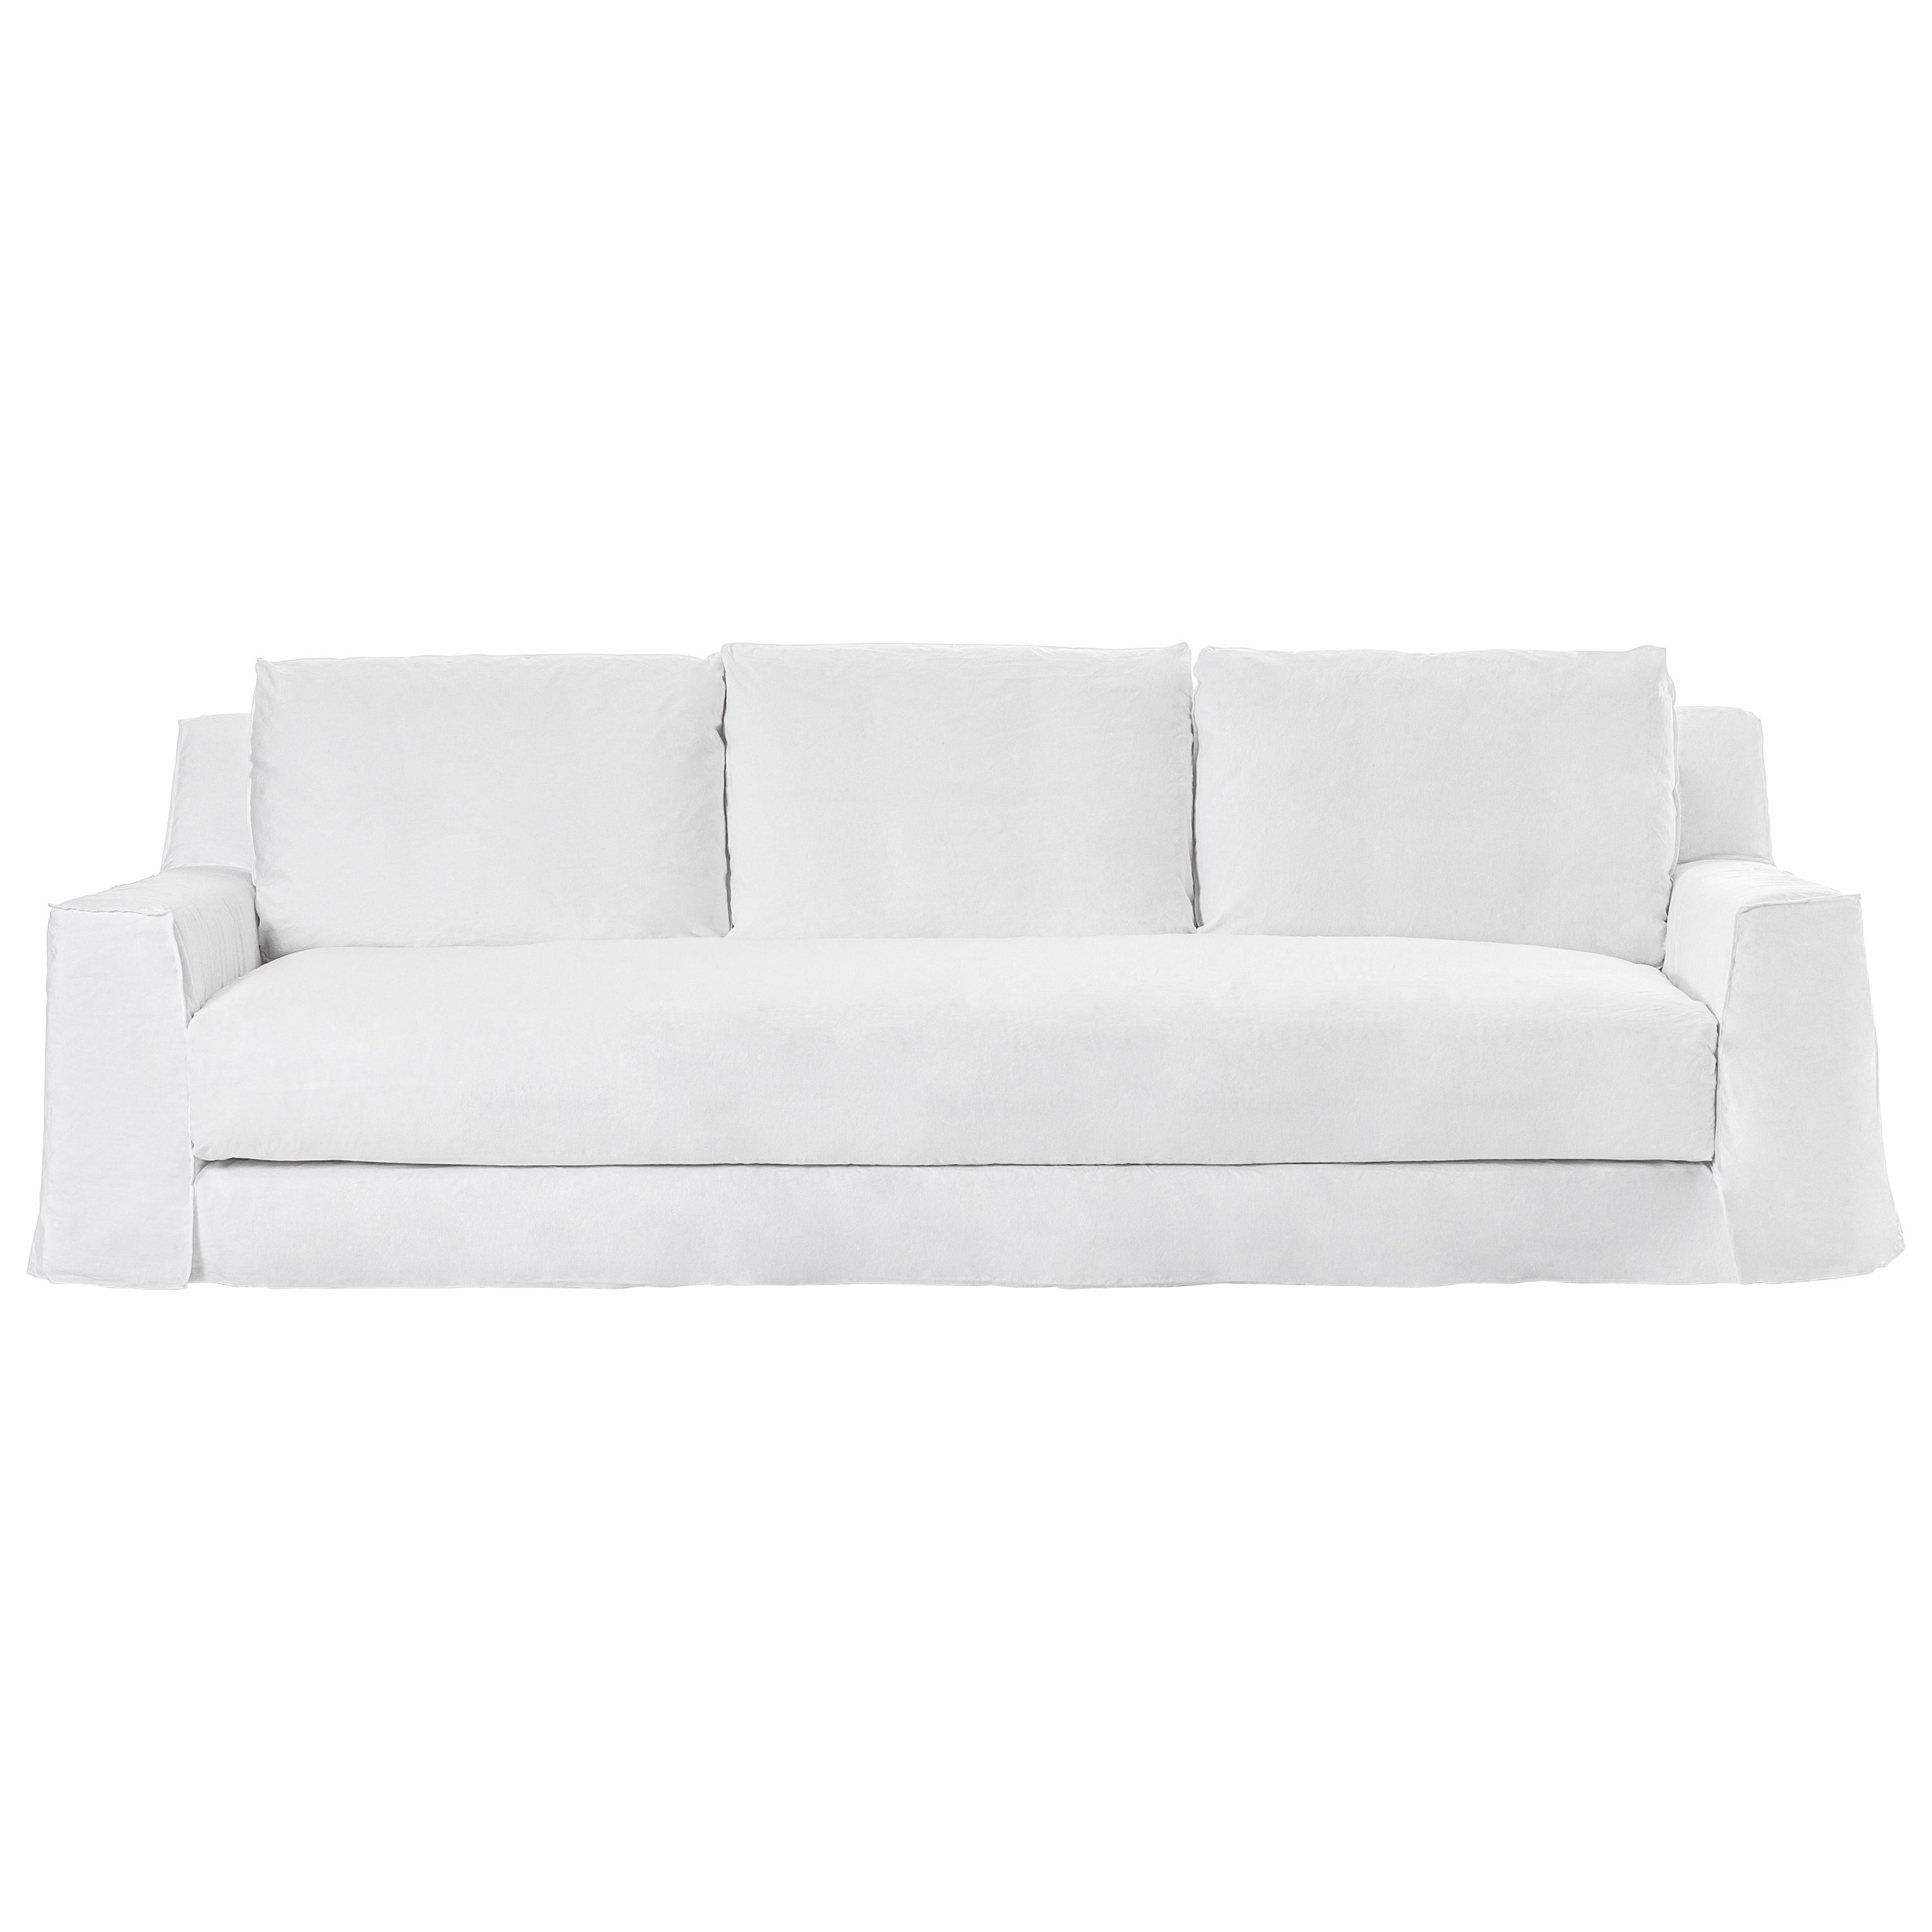 Gervasoni Loll 14 Sofa in White Linen Upholstery by Paola Navone For Sale